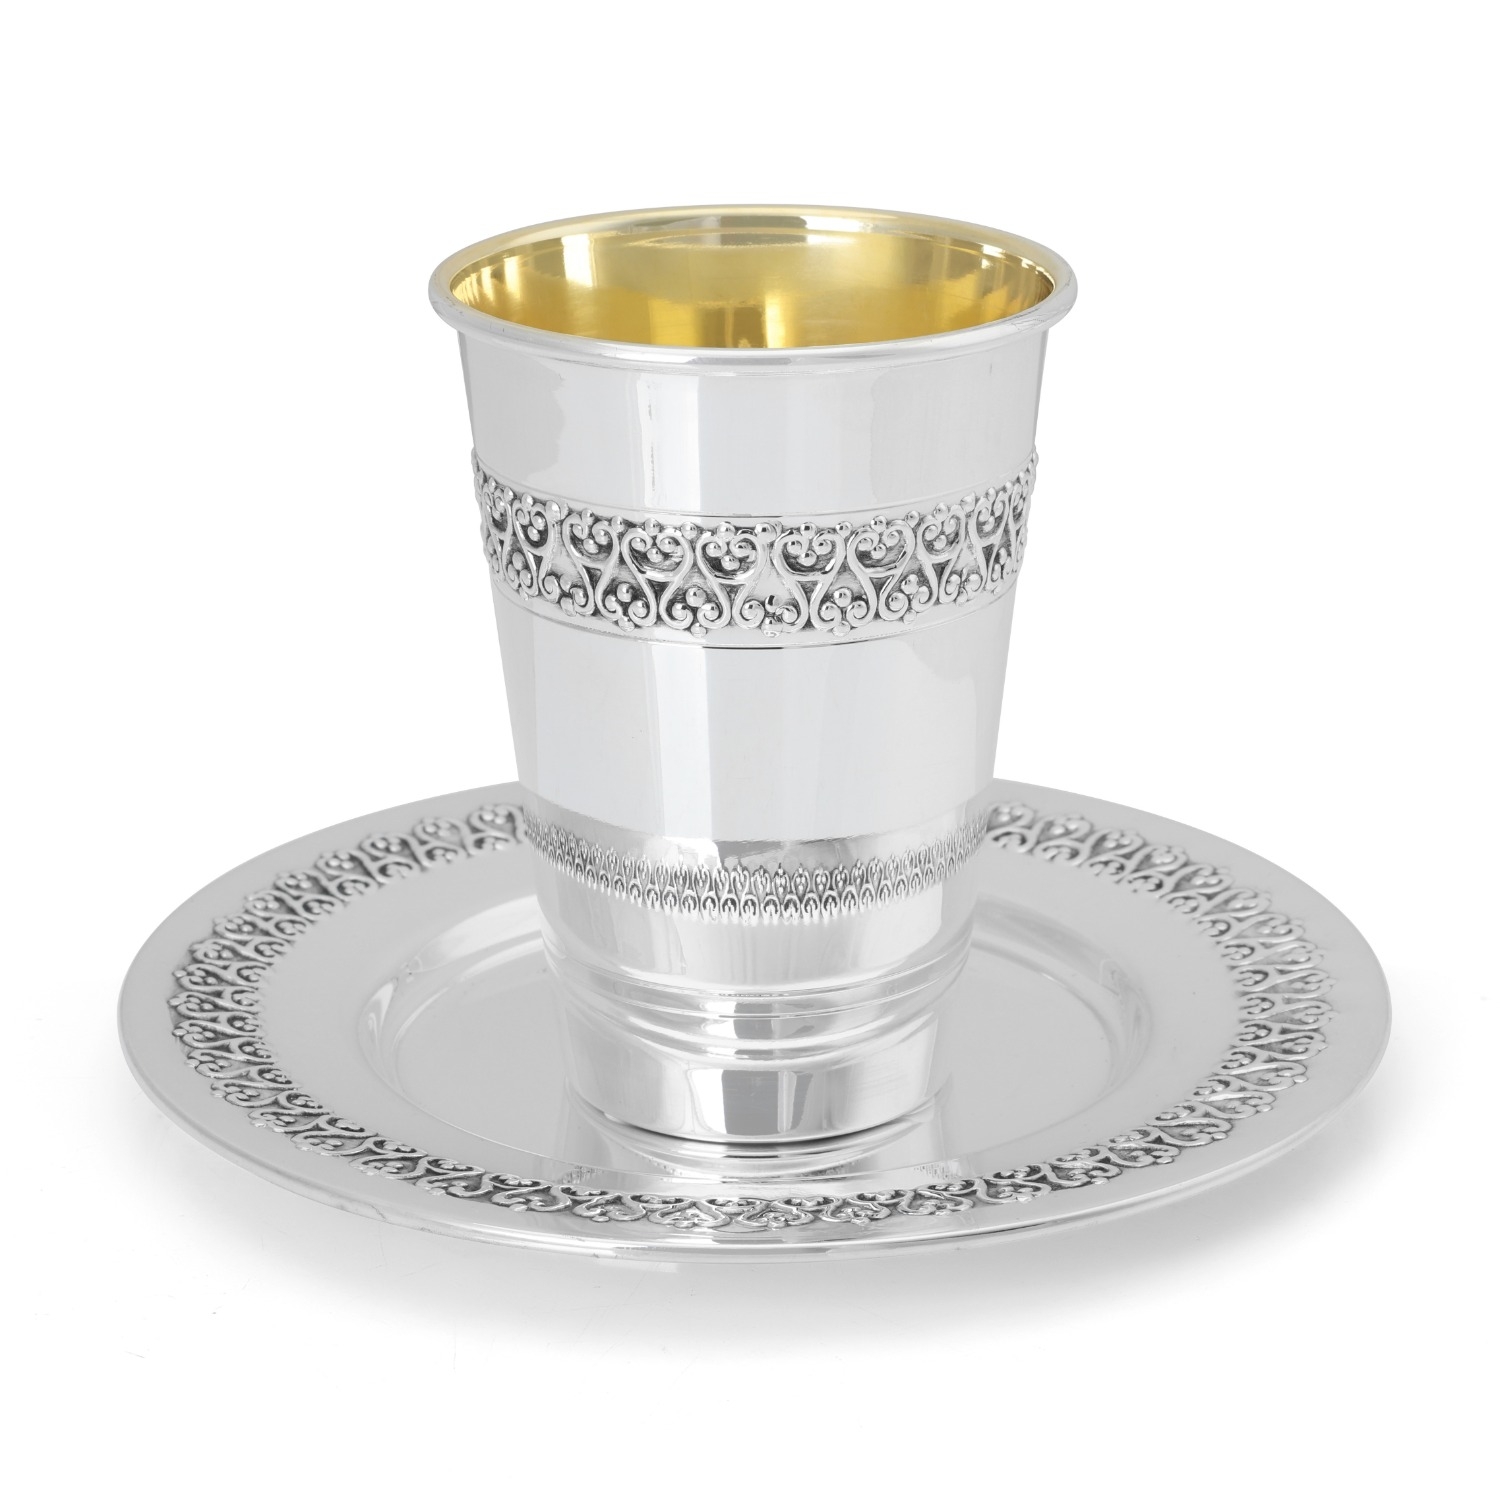 Hadad Bros Sterling Silver Kiddush Cup with Filigree Band - 1